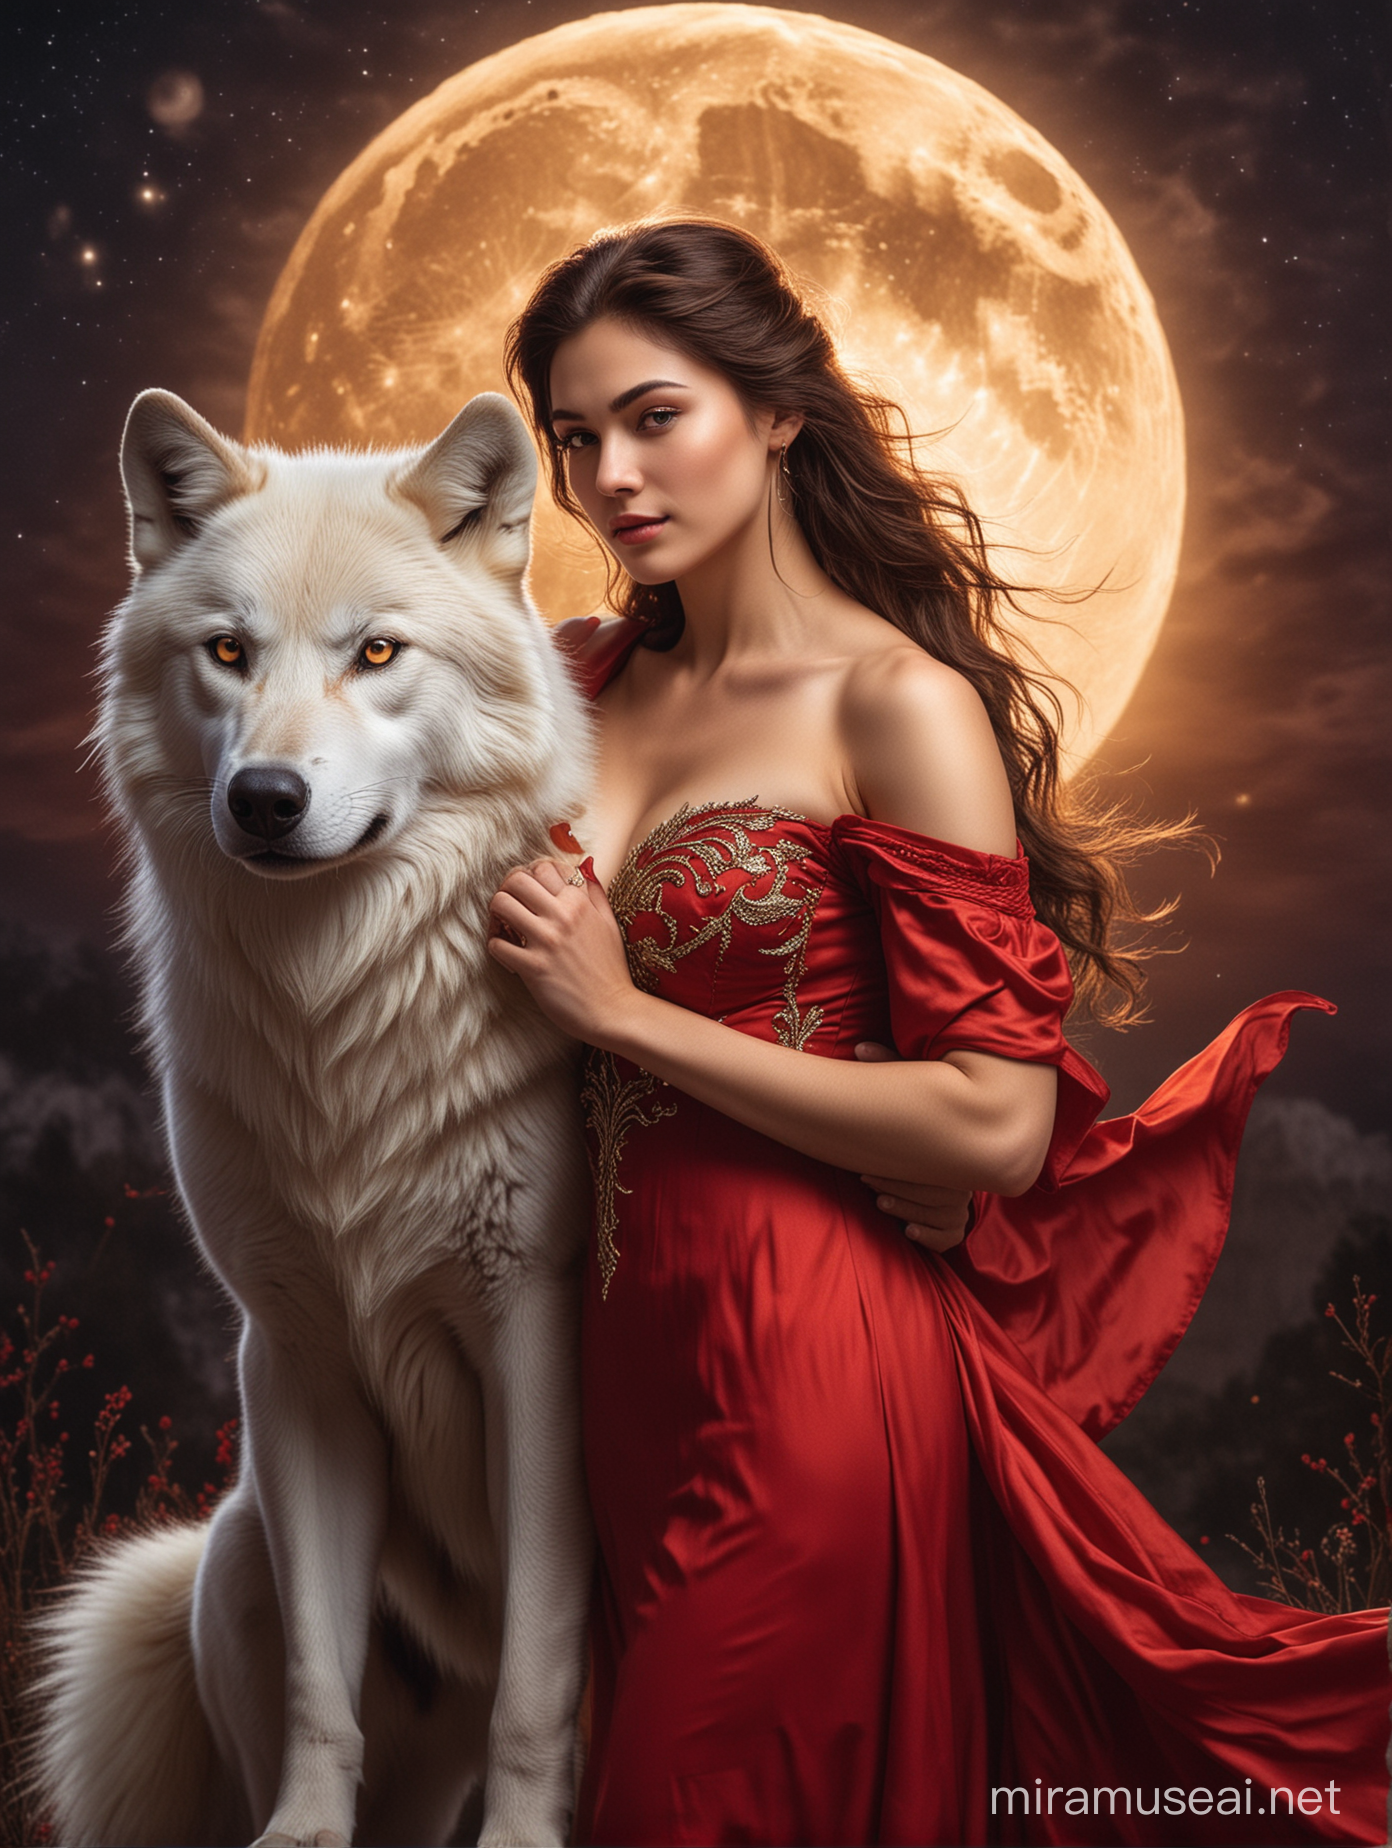 A beautiful woman in a deep red dress held romantically by a muscular handsome young man with a golden white luminous wolf glowing behind them and the moon above